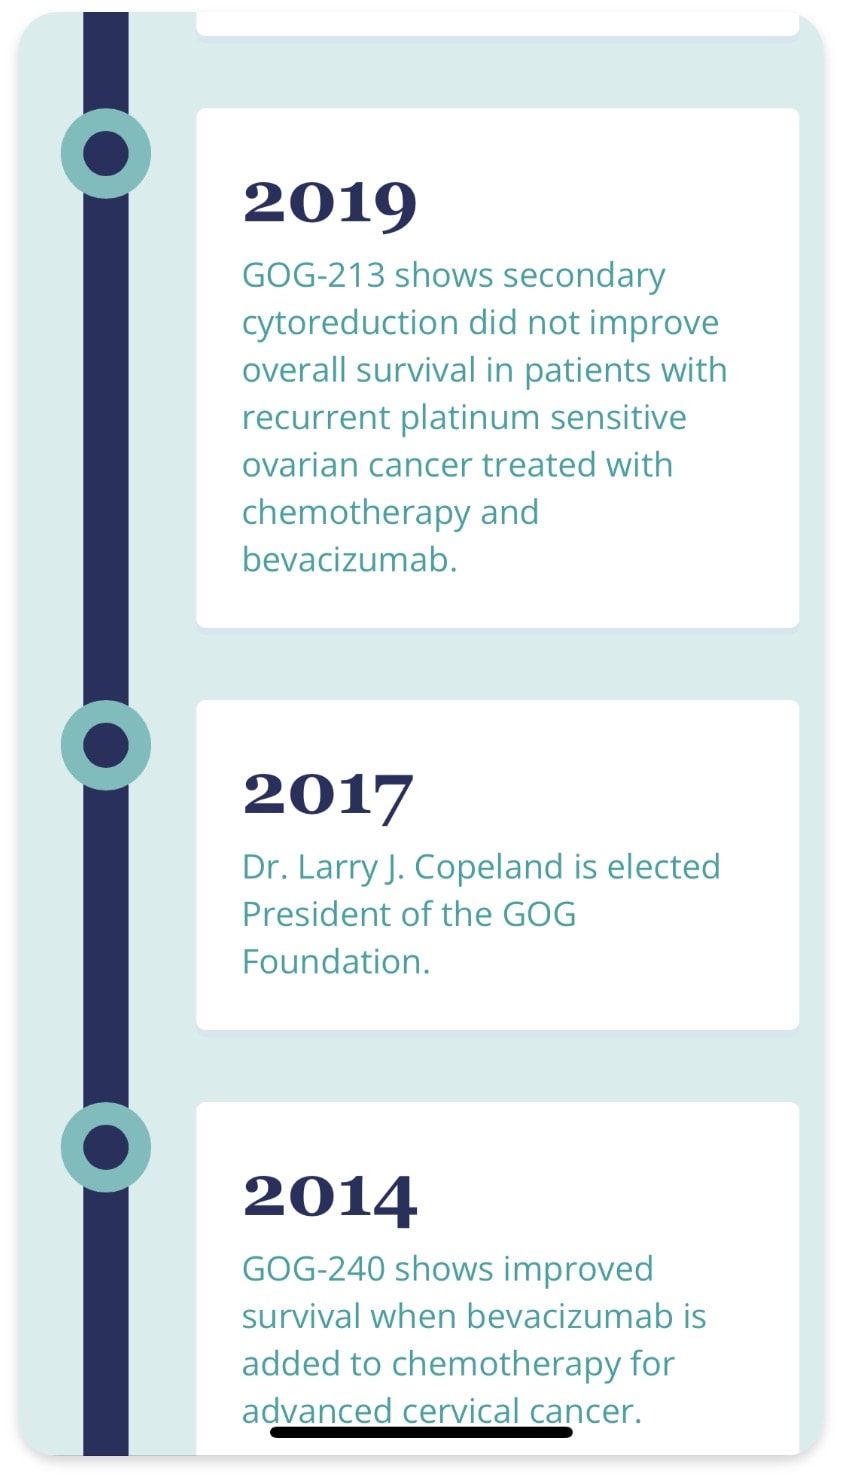 shot from the gog foundation webpage showing a timeline breakdown